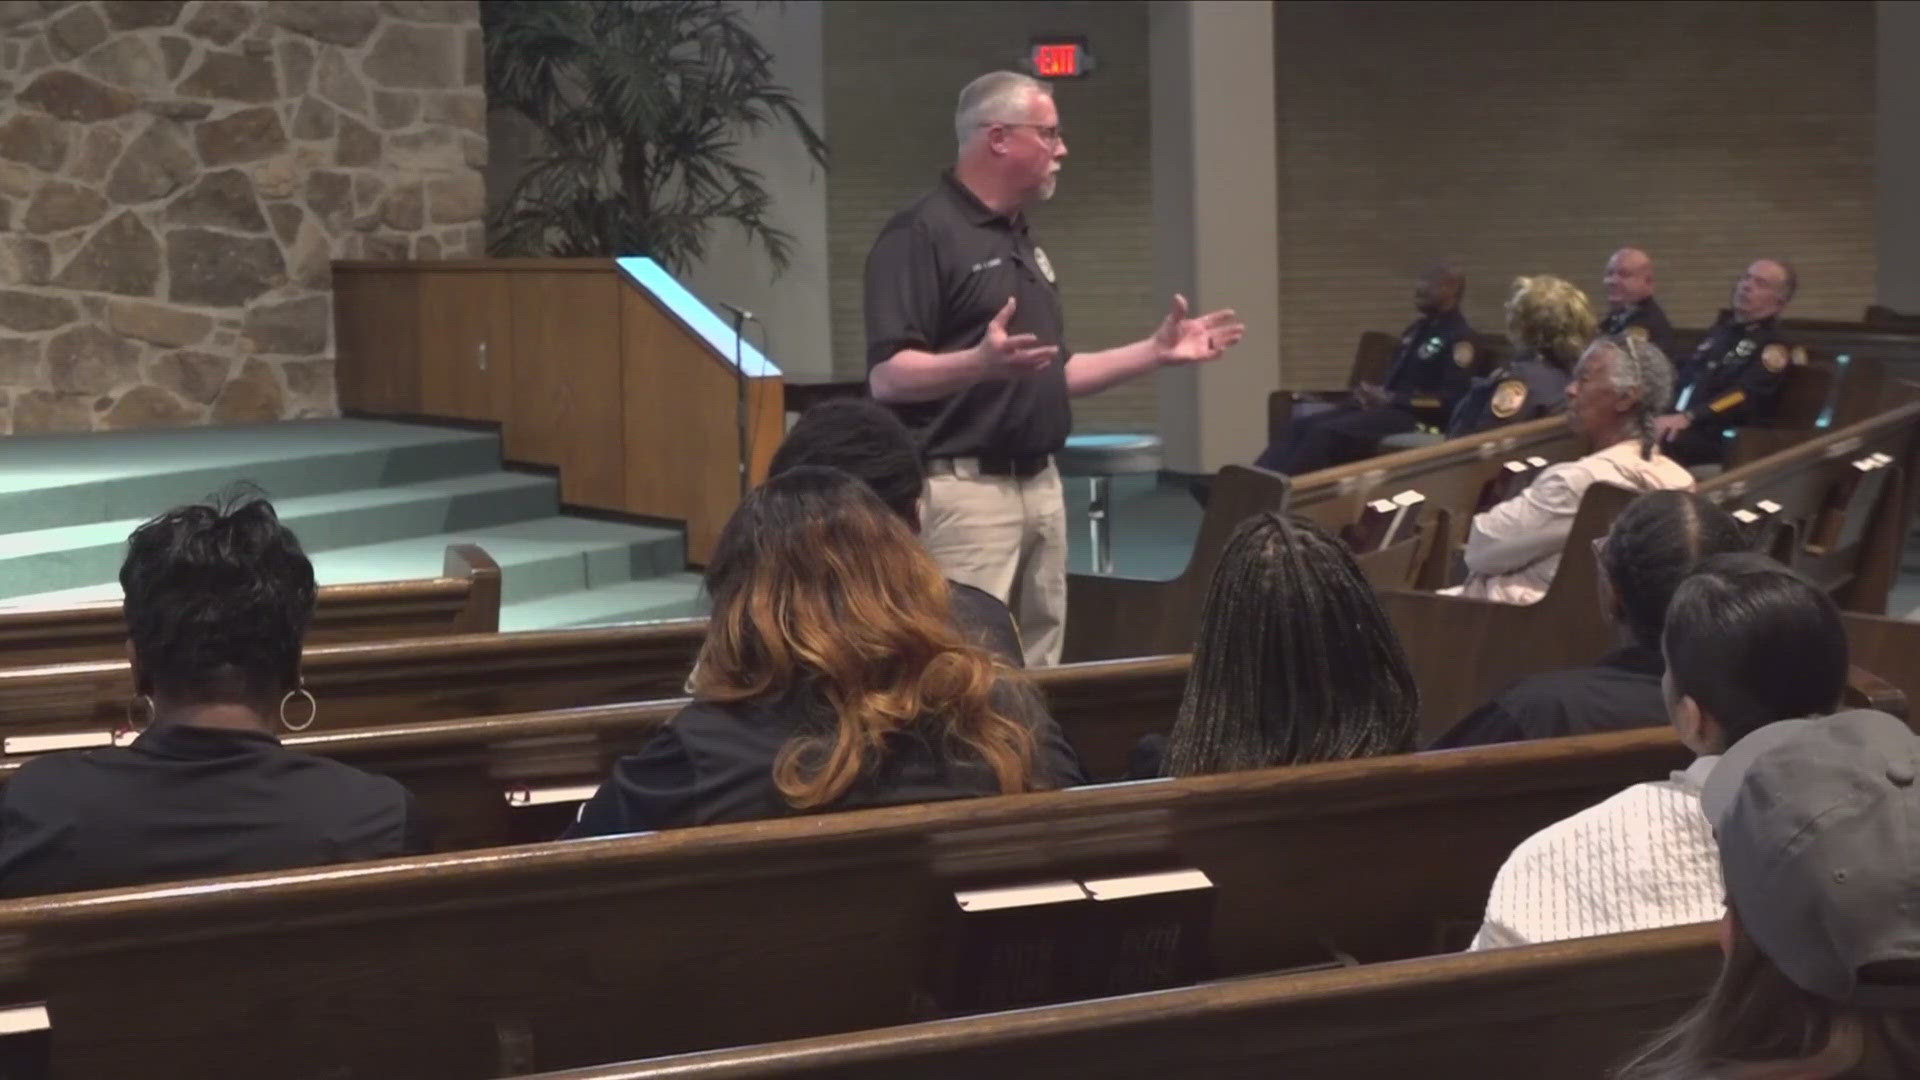 Business owners in Shelby County took their crime concerns directly to Memphis Police on Thursday at The Church of Christ in White Station.